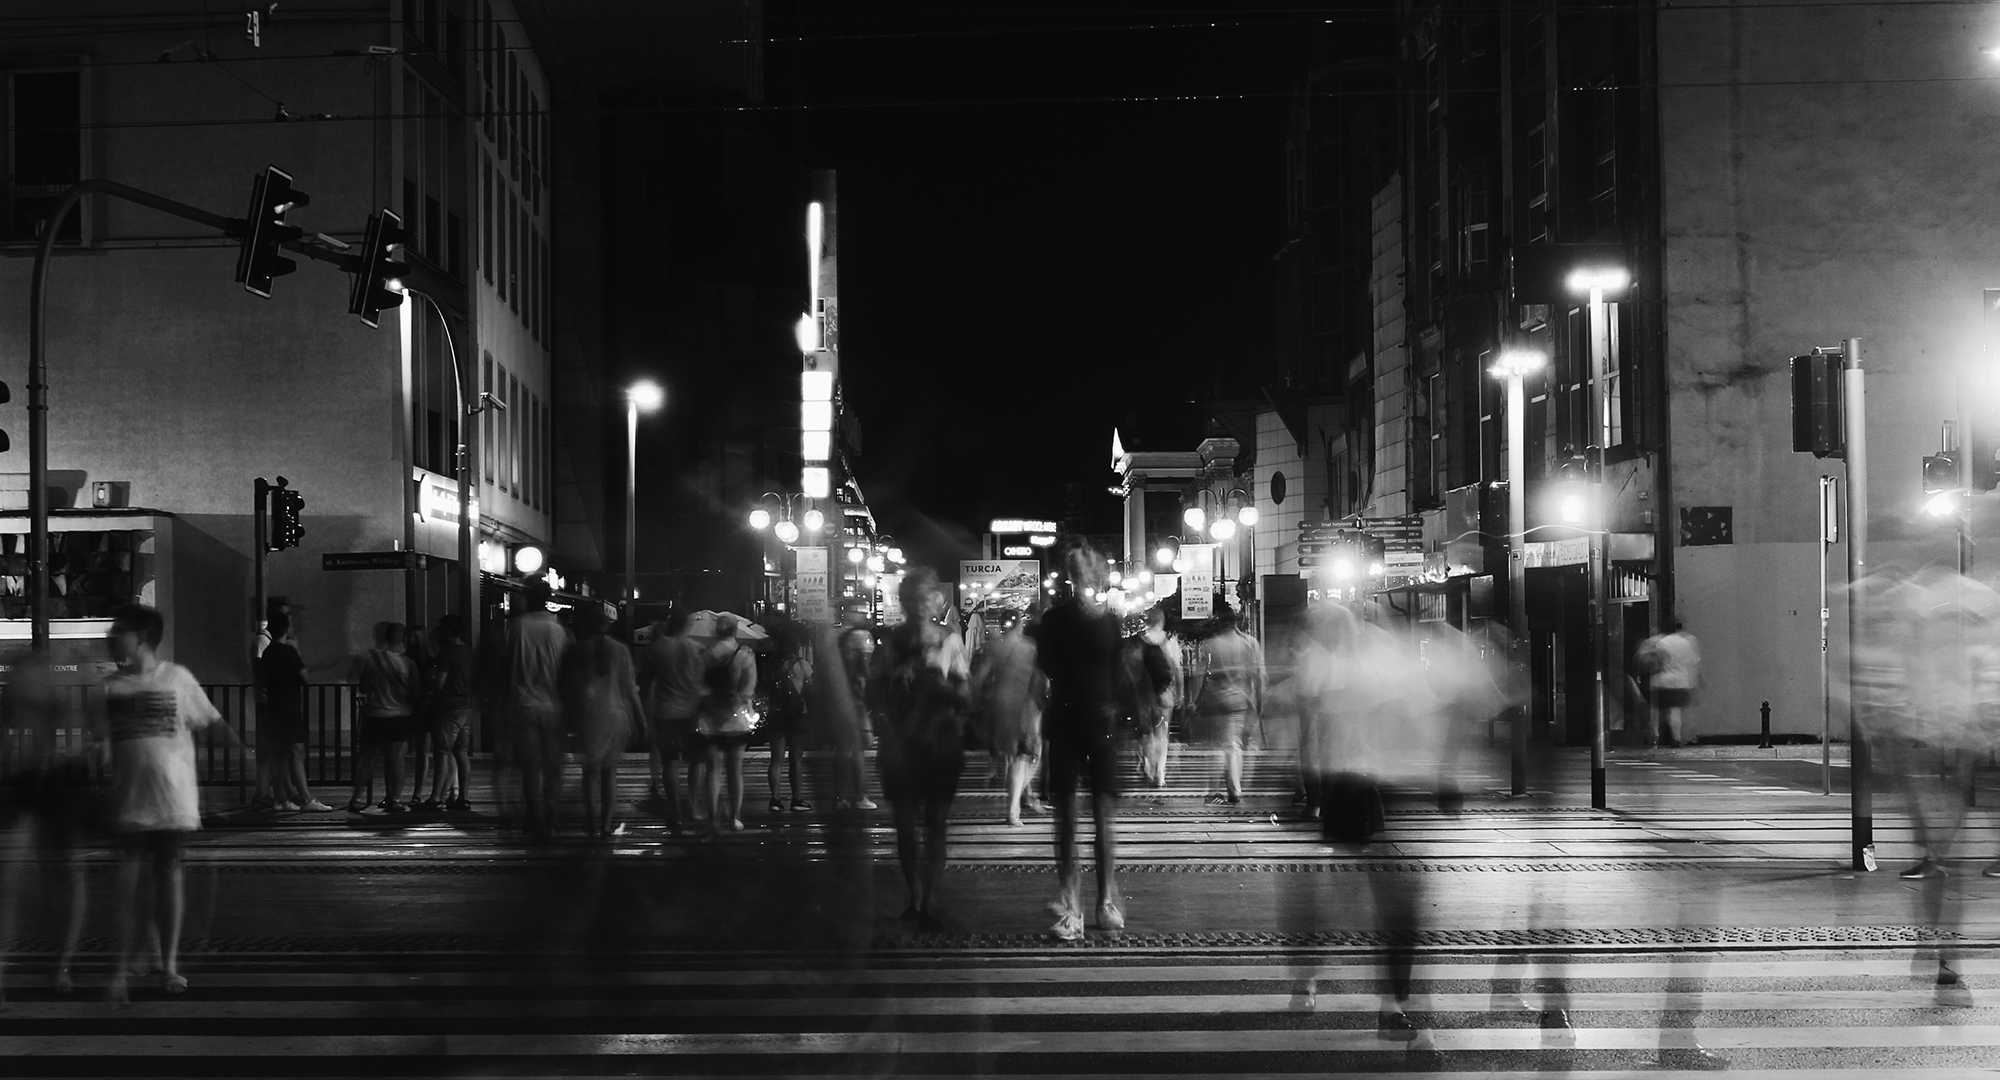 Bluer of people walking in the city at night.